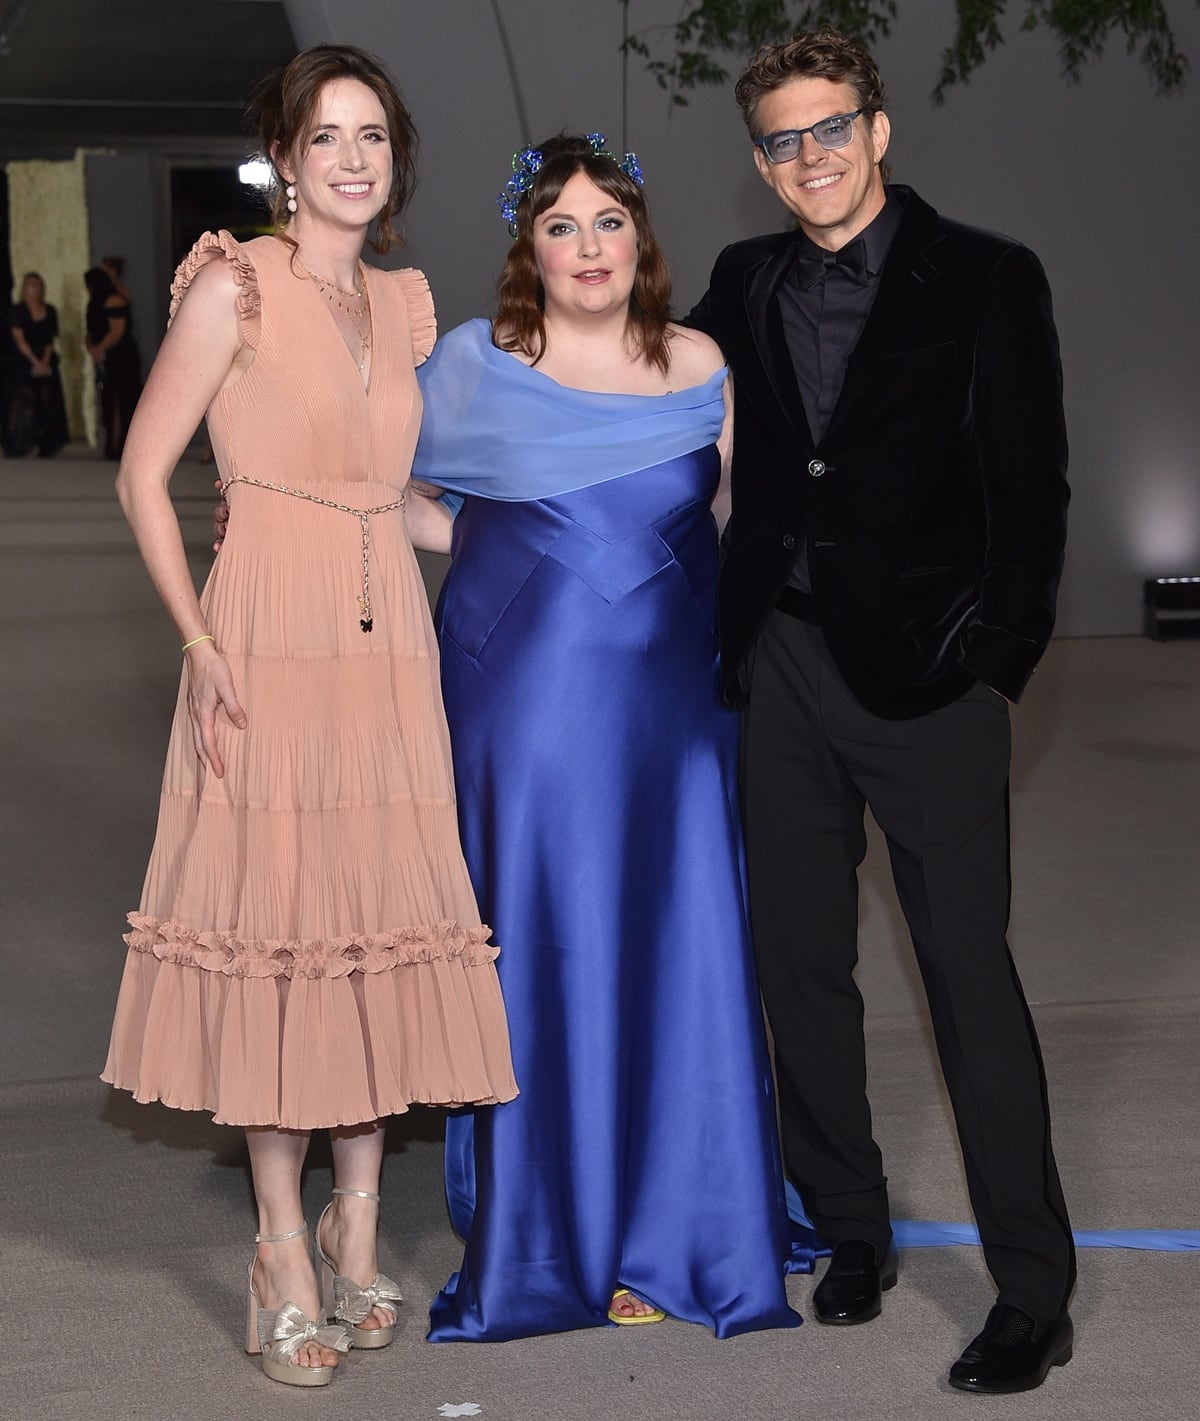 Lauren A. E. Schuker, Lena Dunham, and Jason Blum attend the 2nd Annual Academy Museum Gala at the Academy Museum of Motion Pictures